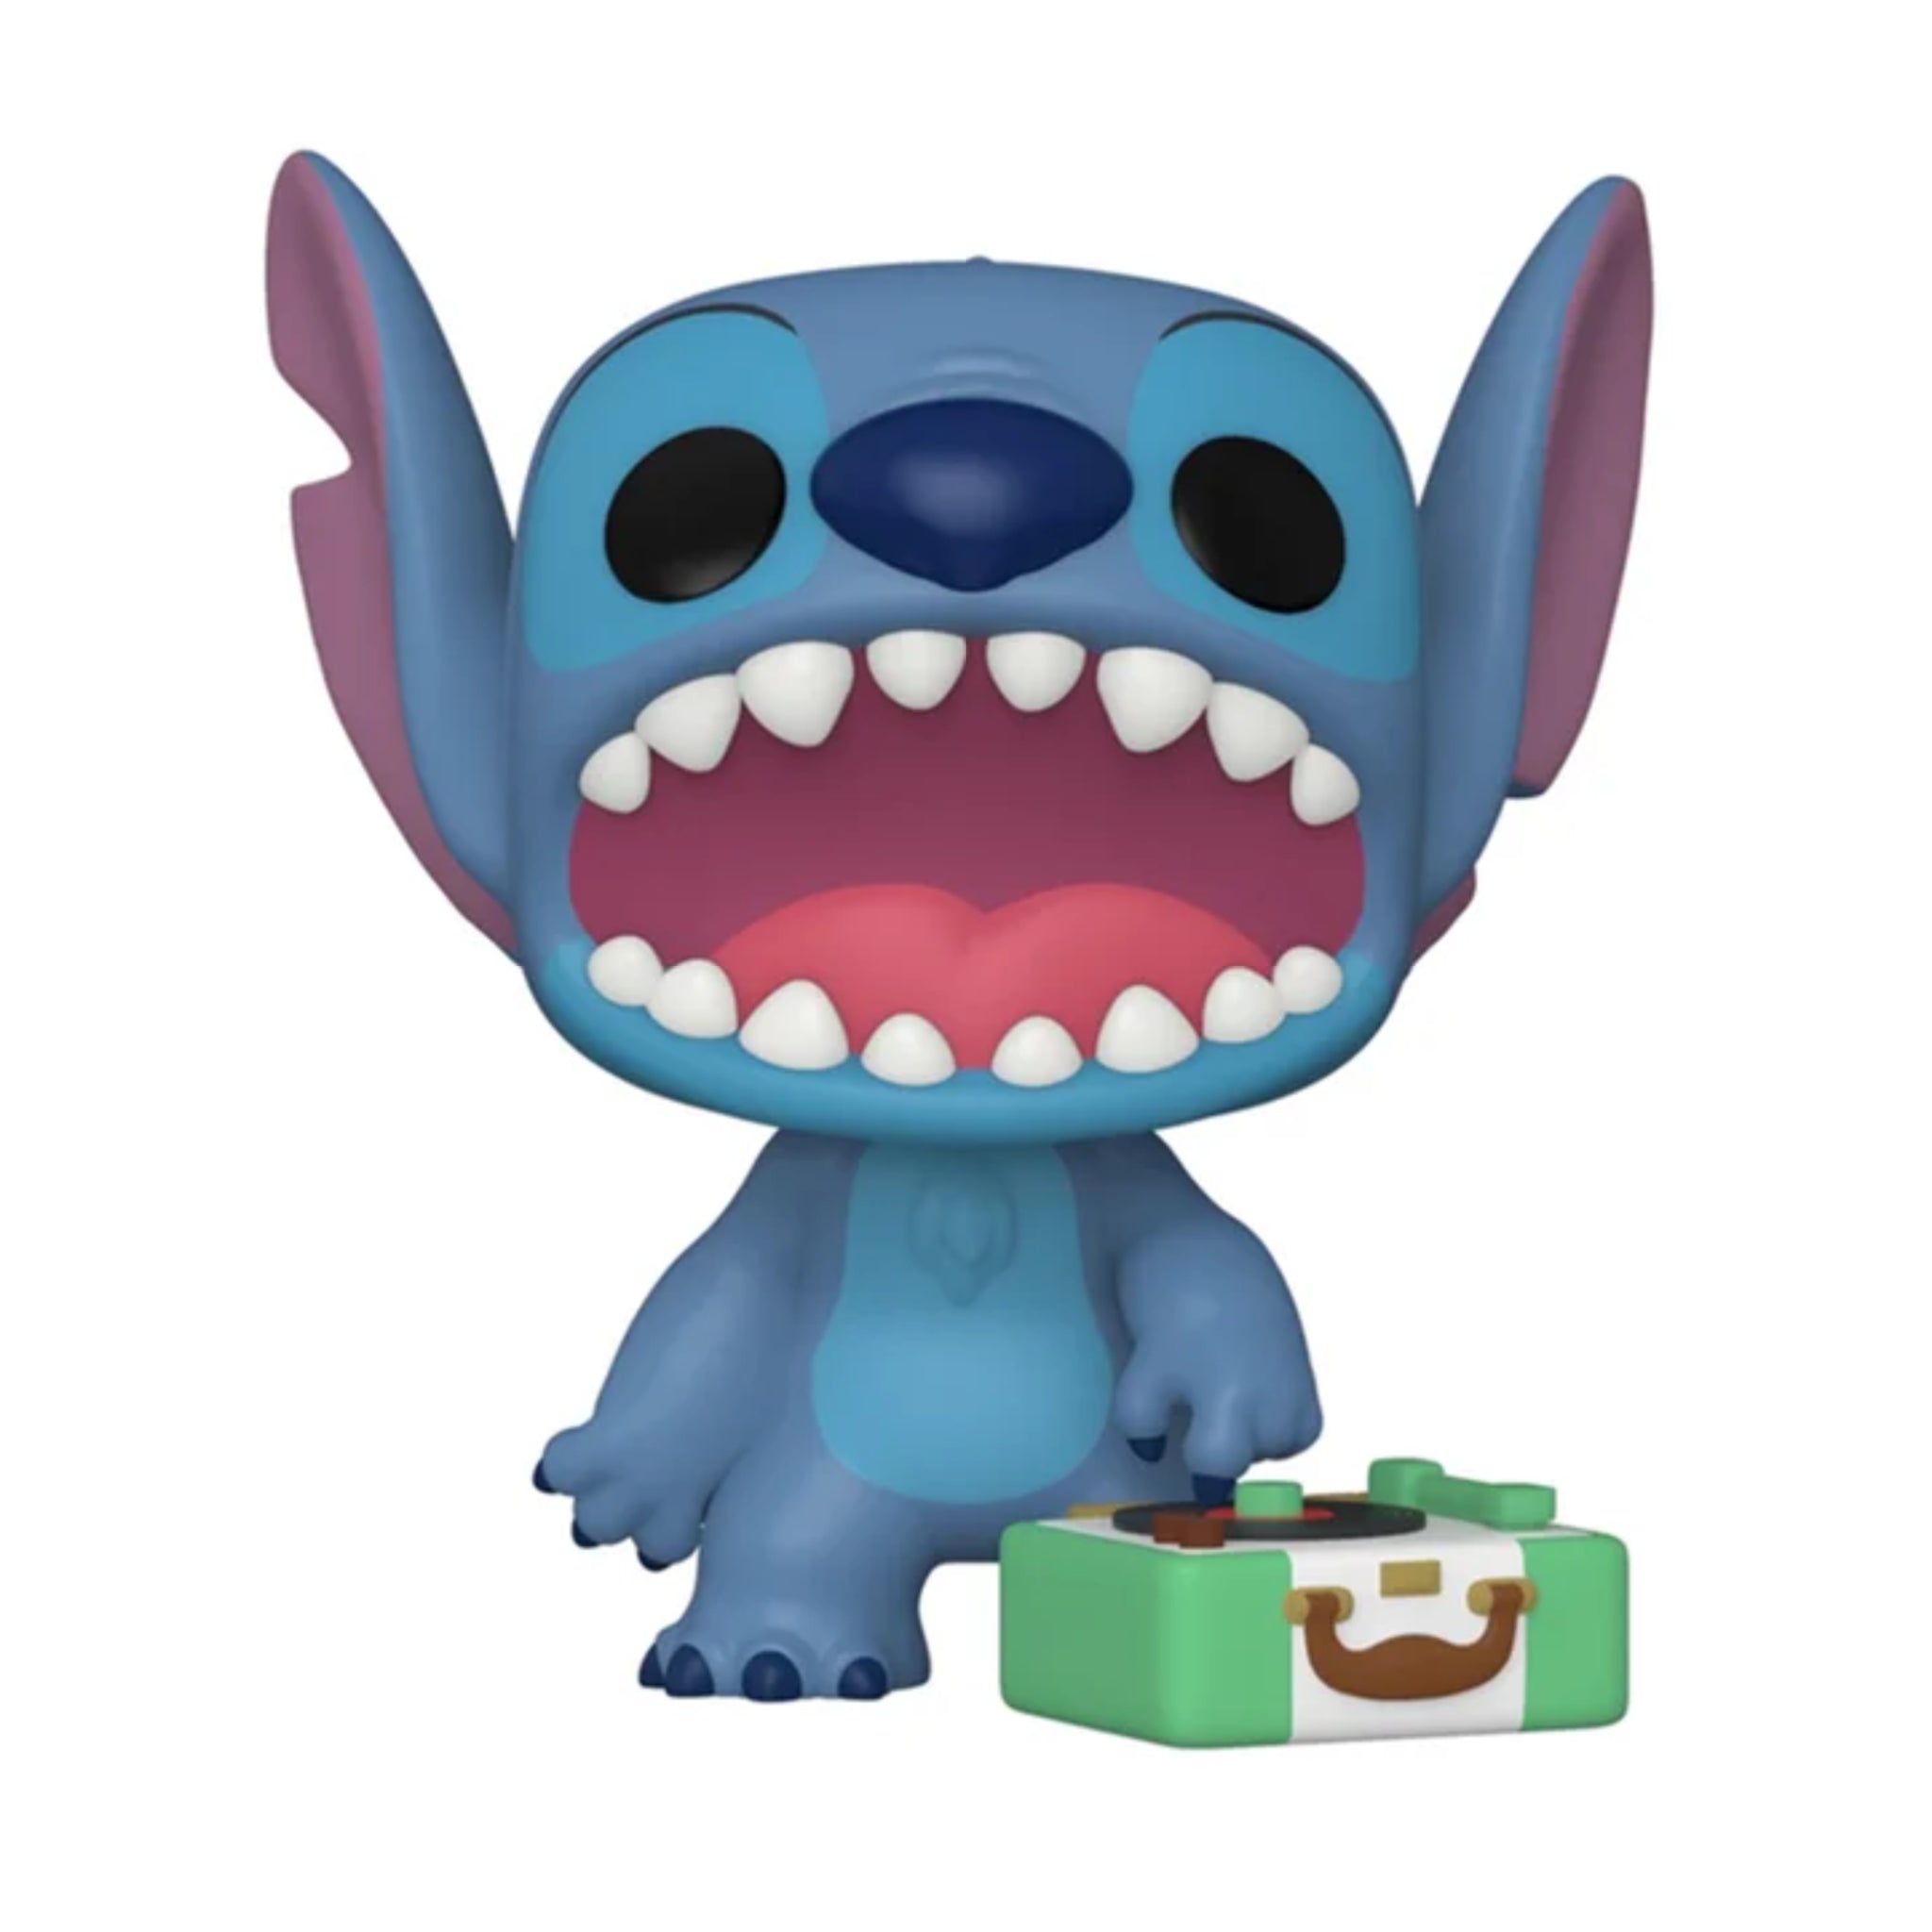 Stitch with Record Player (b) Funko Pop! LIMITED CHASE EDITION, FUNKO EXCLUSIVE NEW